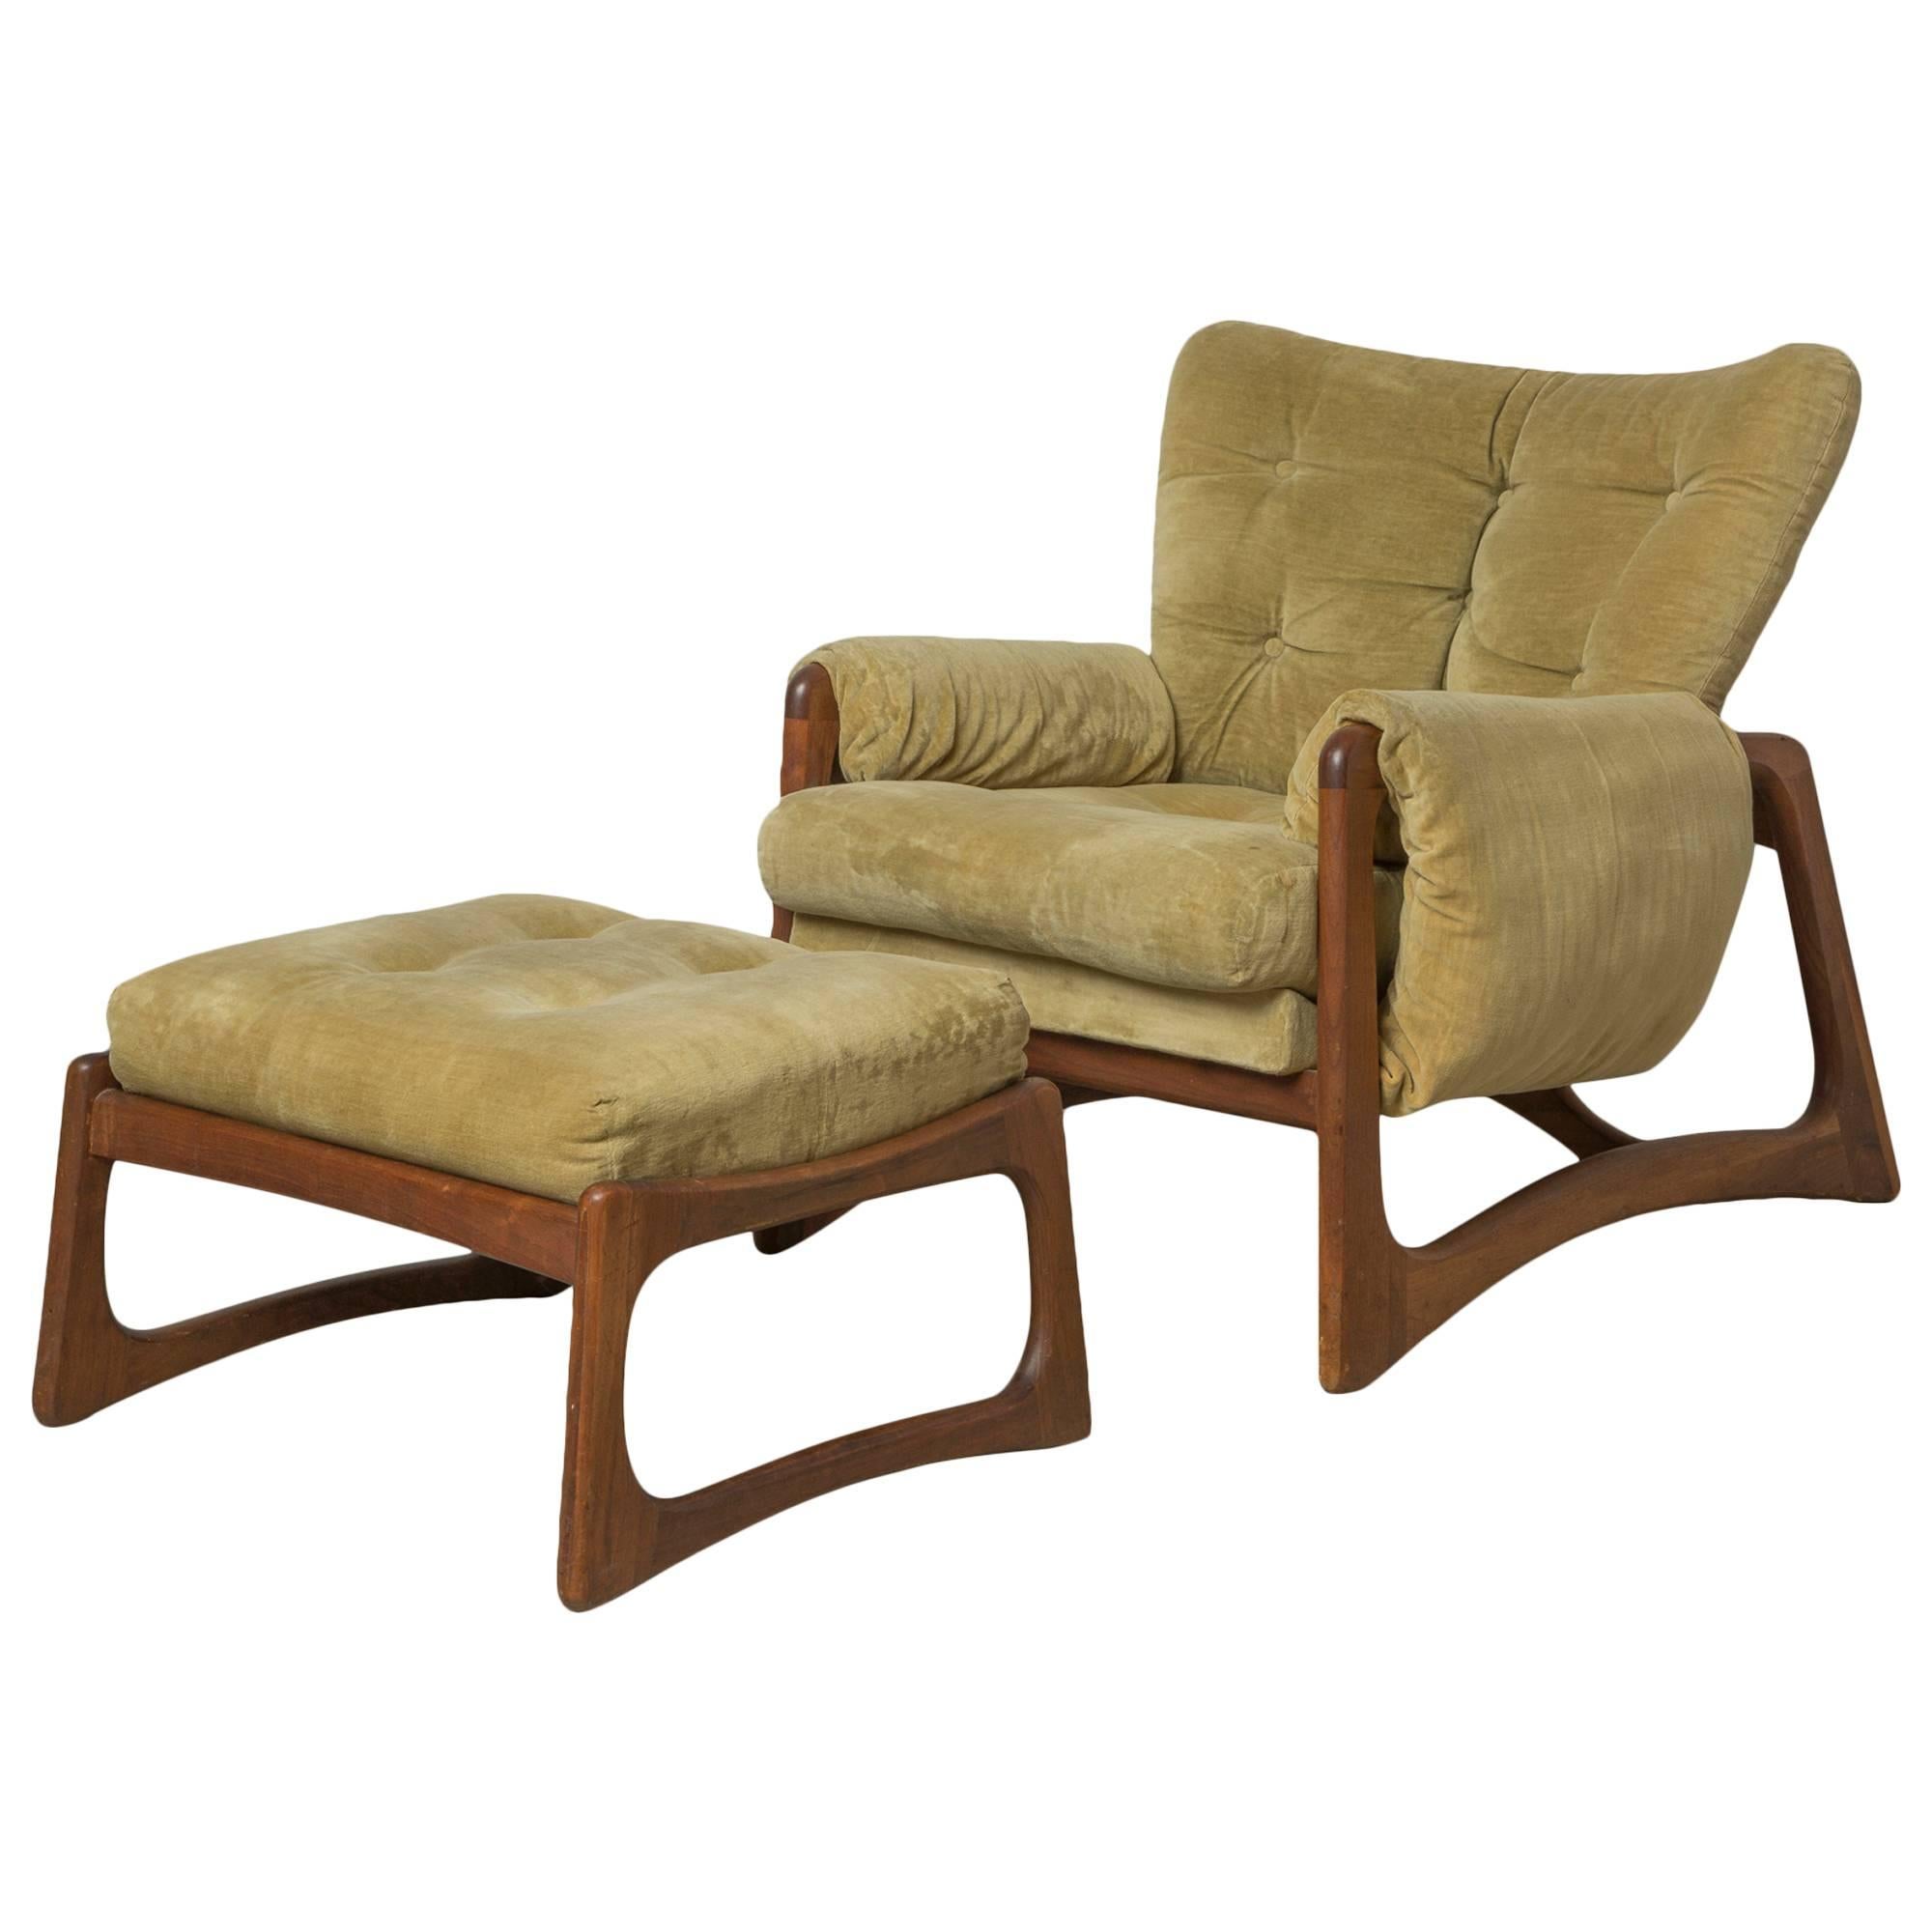 Adrian Pearsall Sculpted Walnut Lounge Chair & Ottoman in Green Velvet